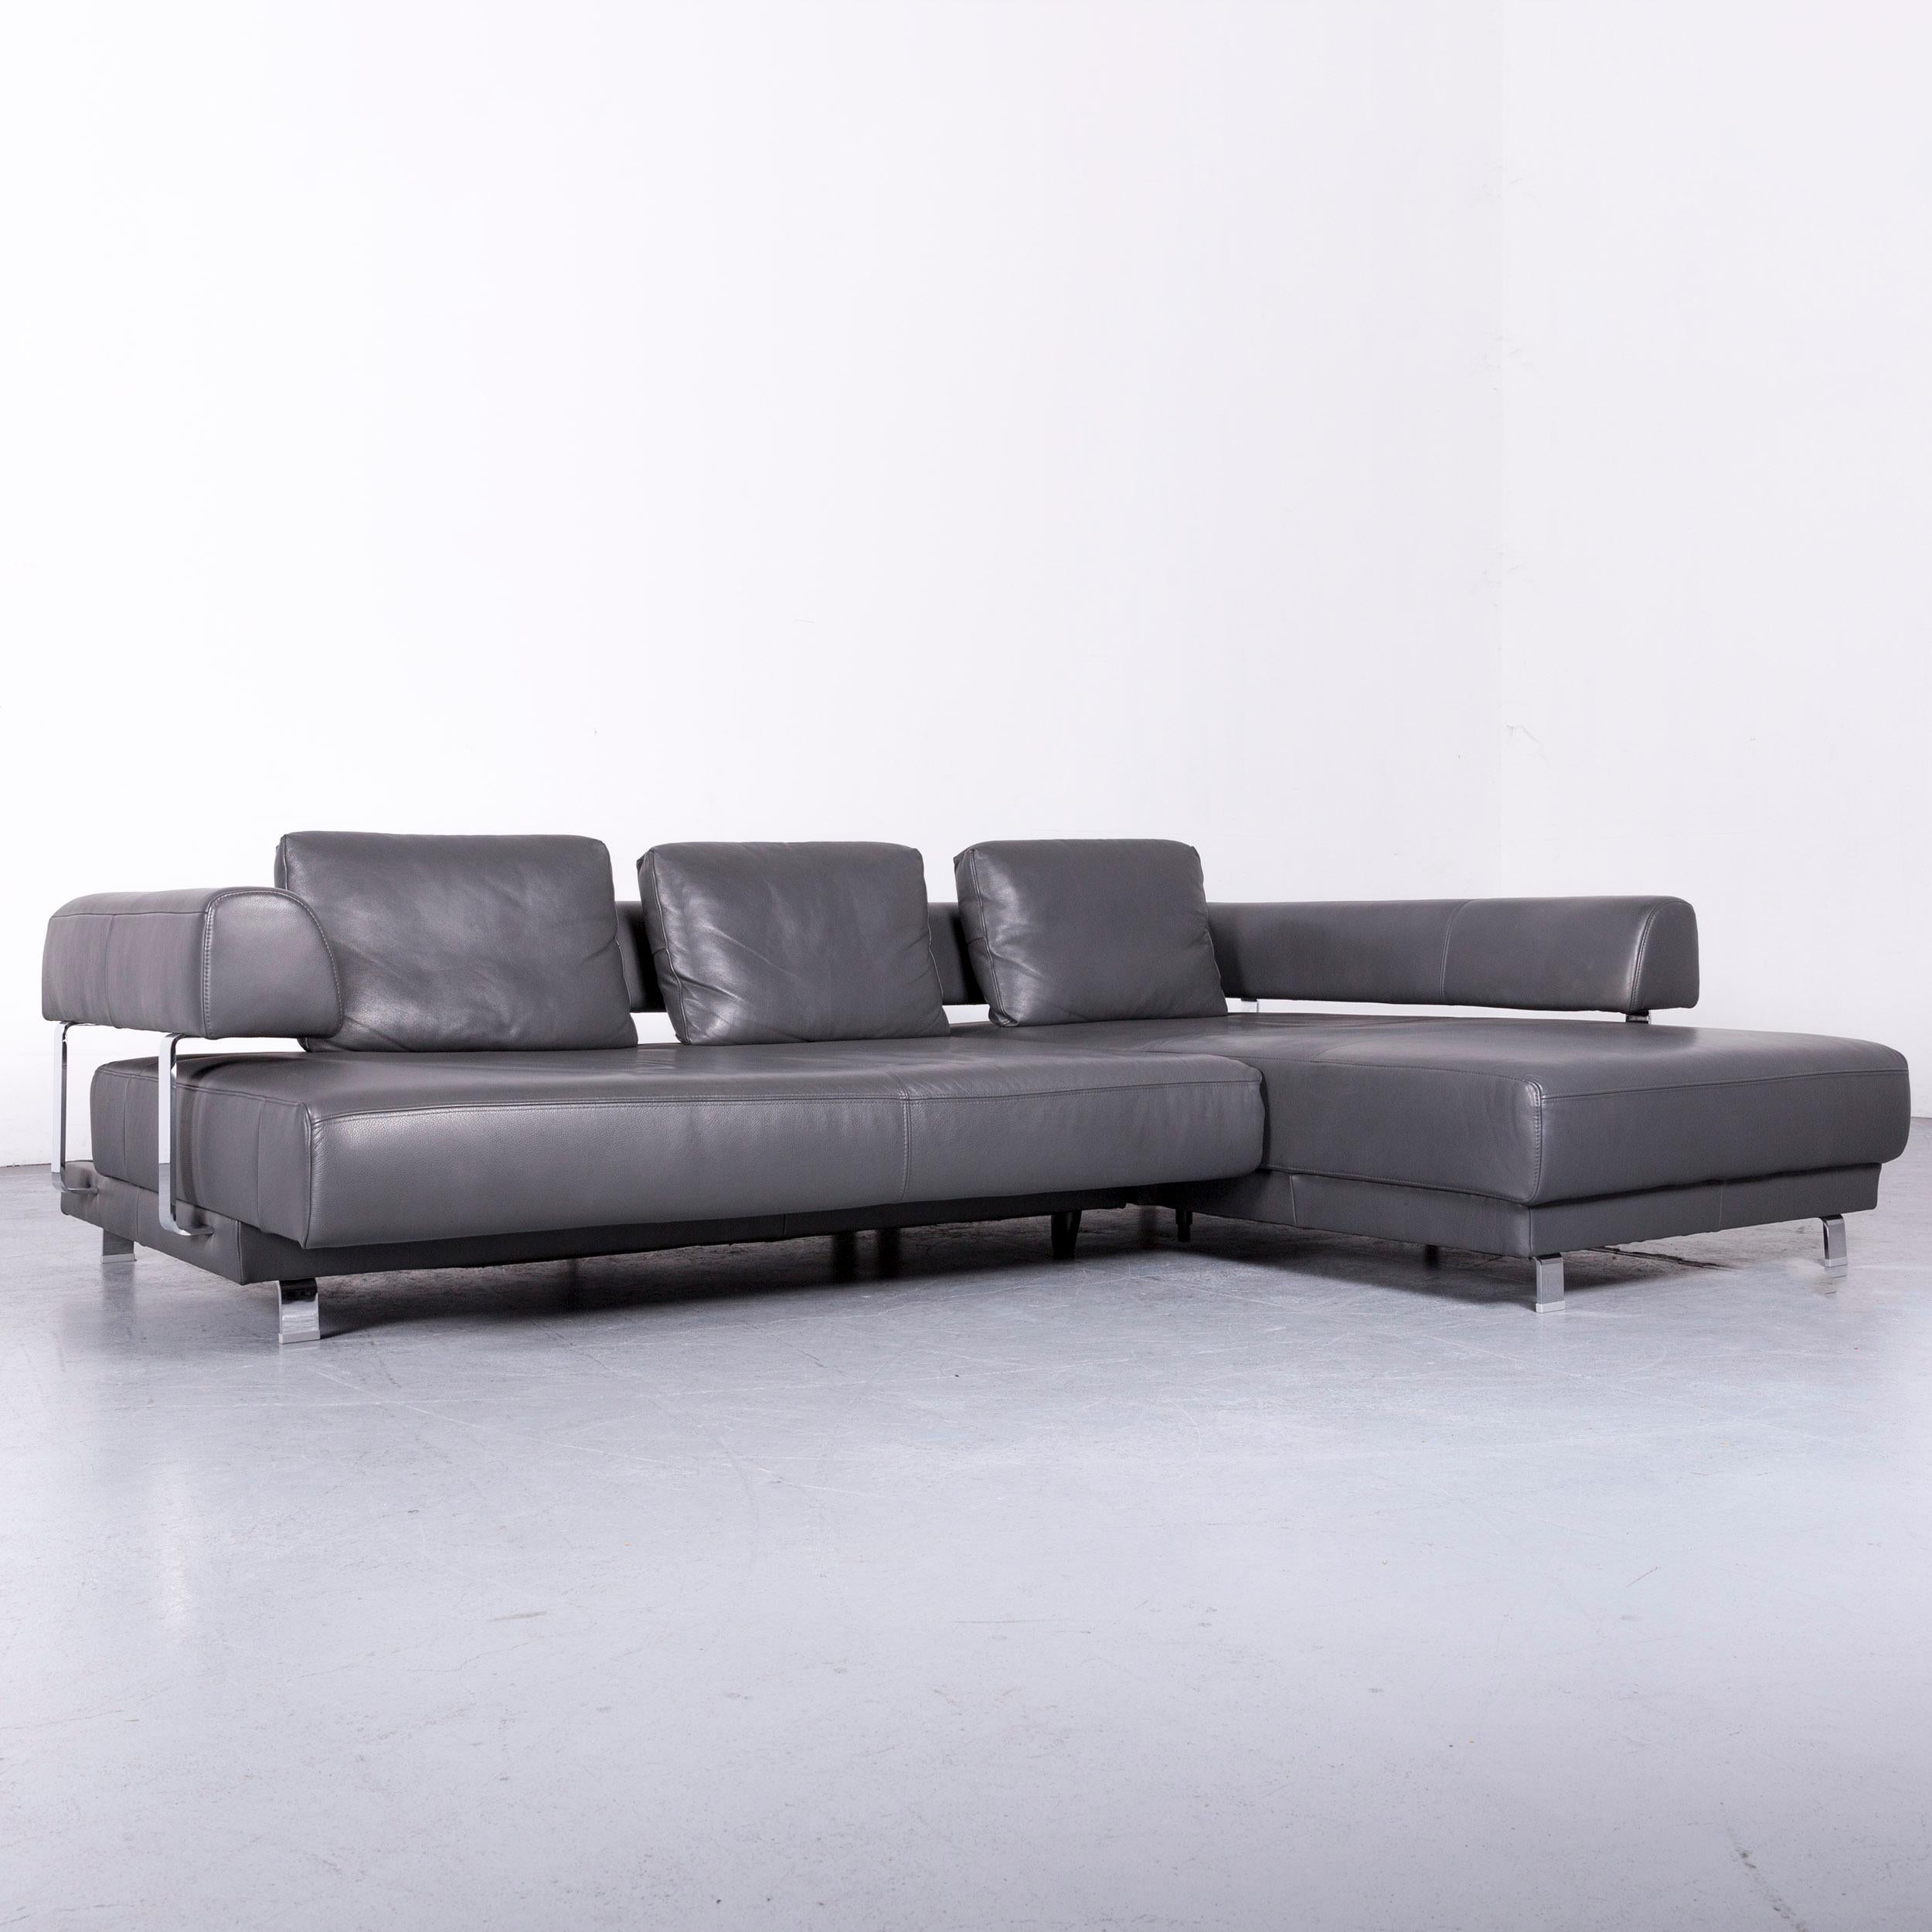 We bring to you an Ewald Schillig Brand Face designer sofa leather grey corner couch.